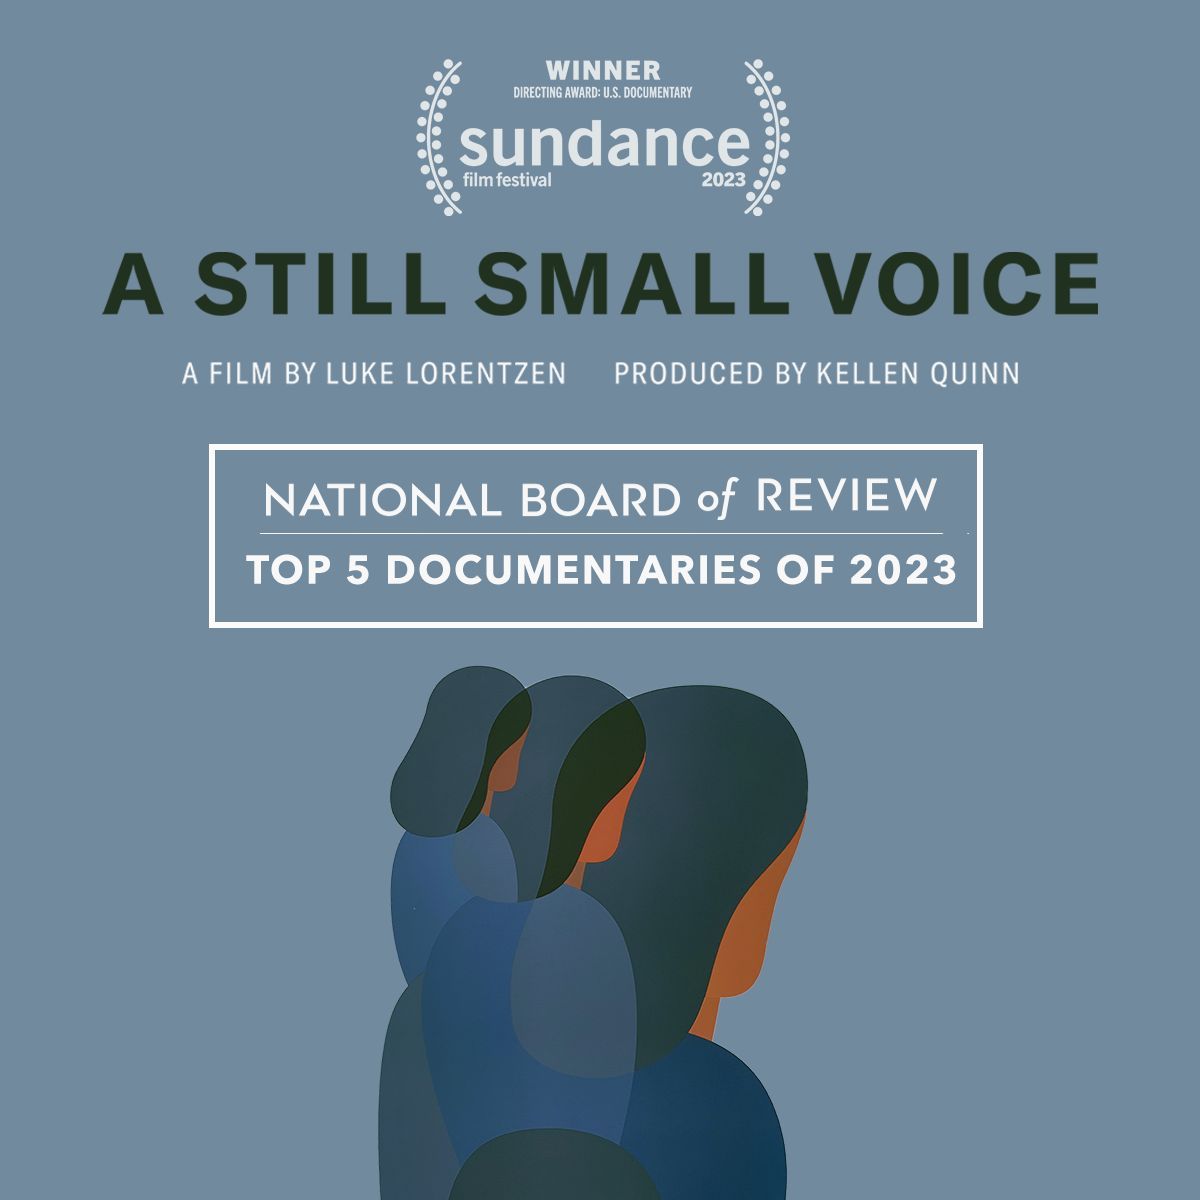 #AStillSmallVoice is now in select theaters. buff.ly/4abv08v @NBRfilm